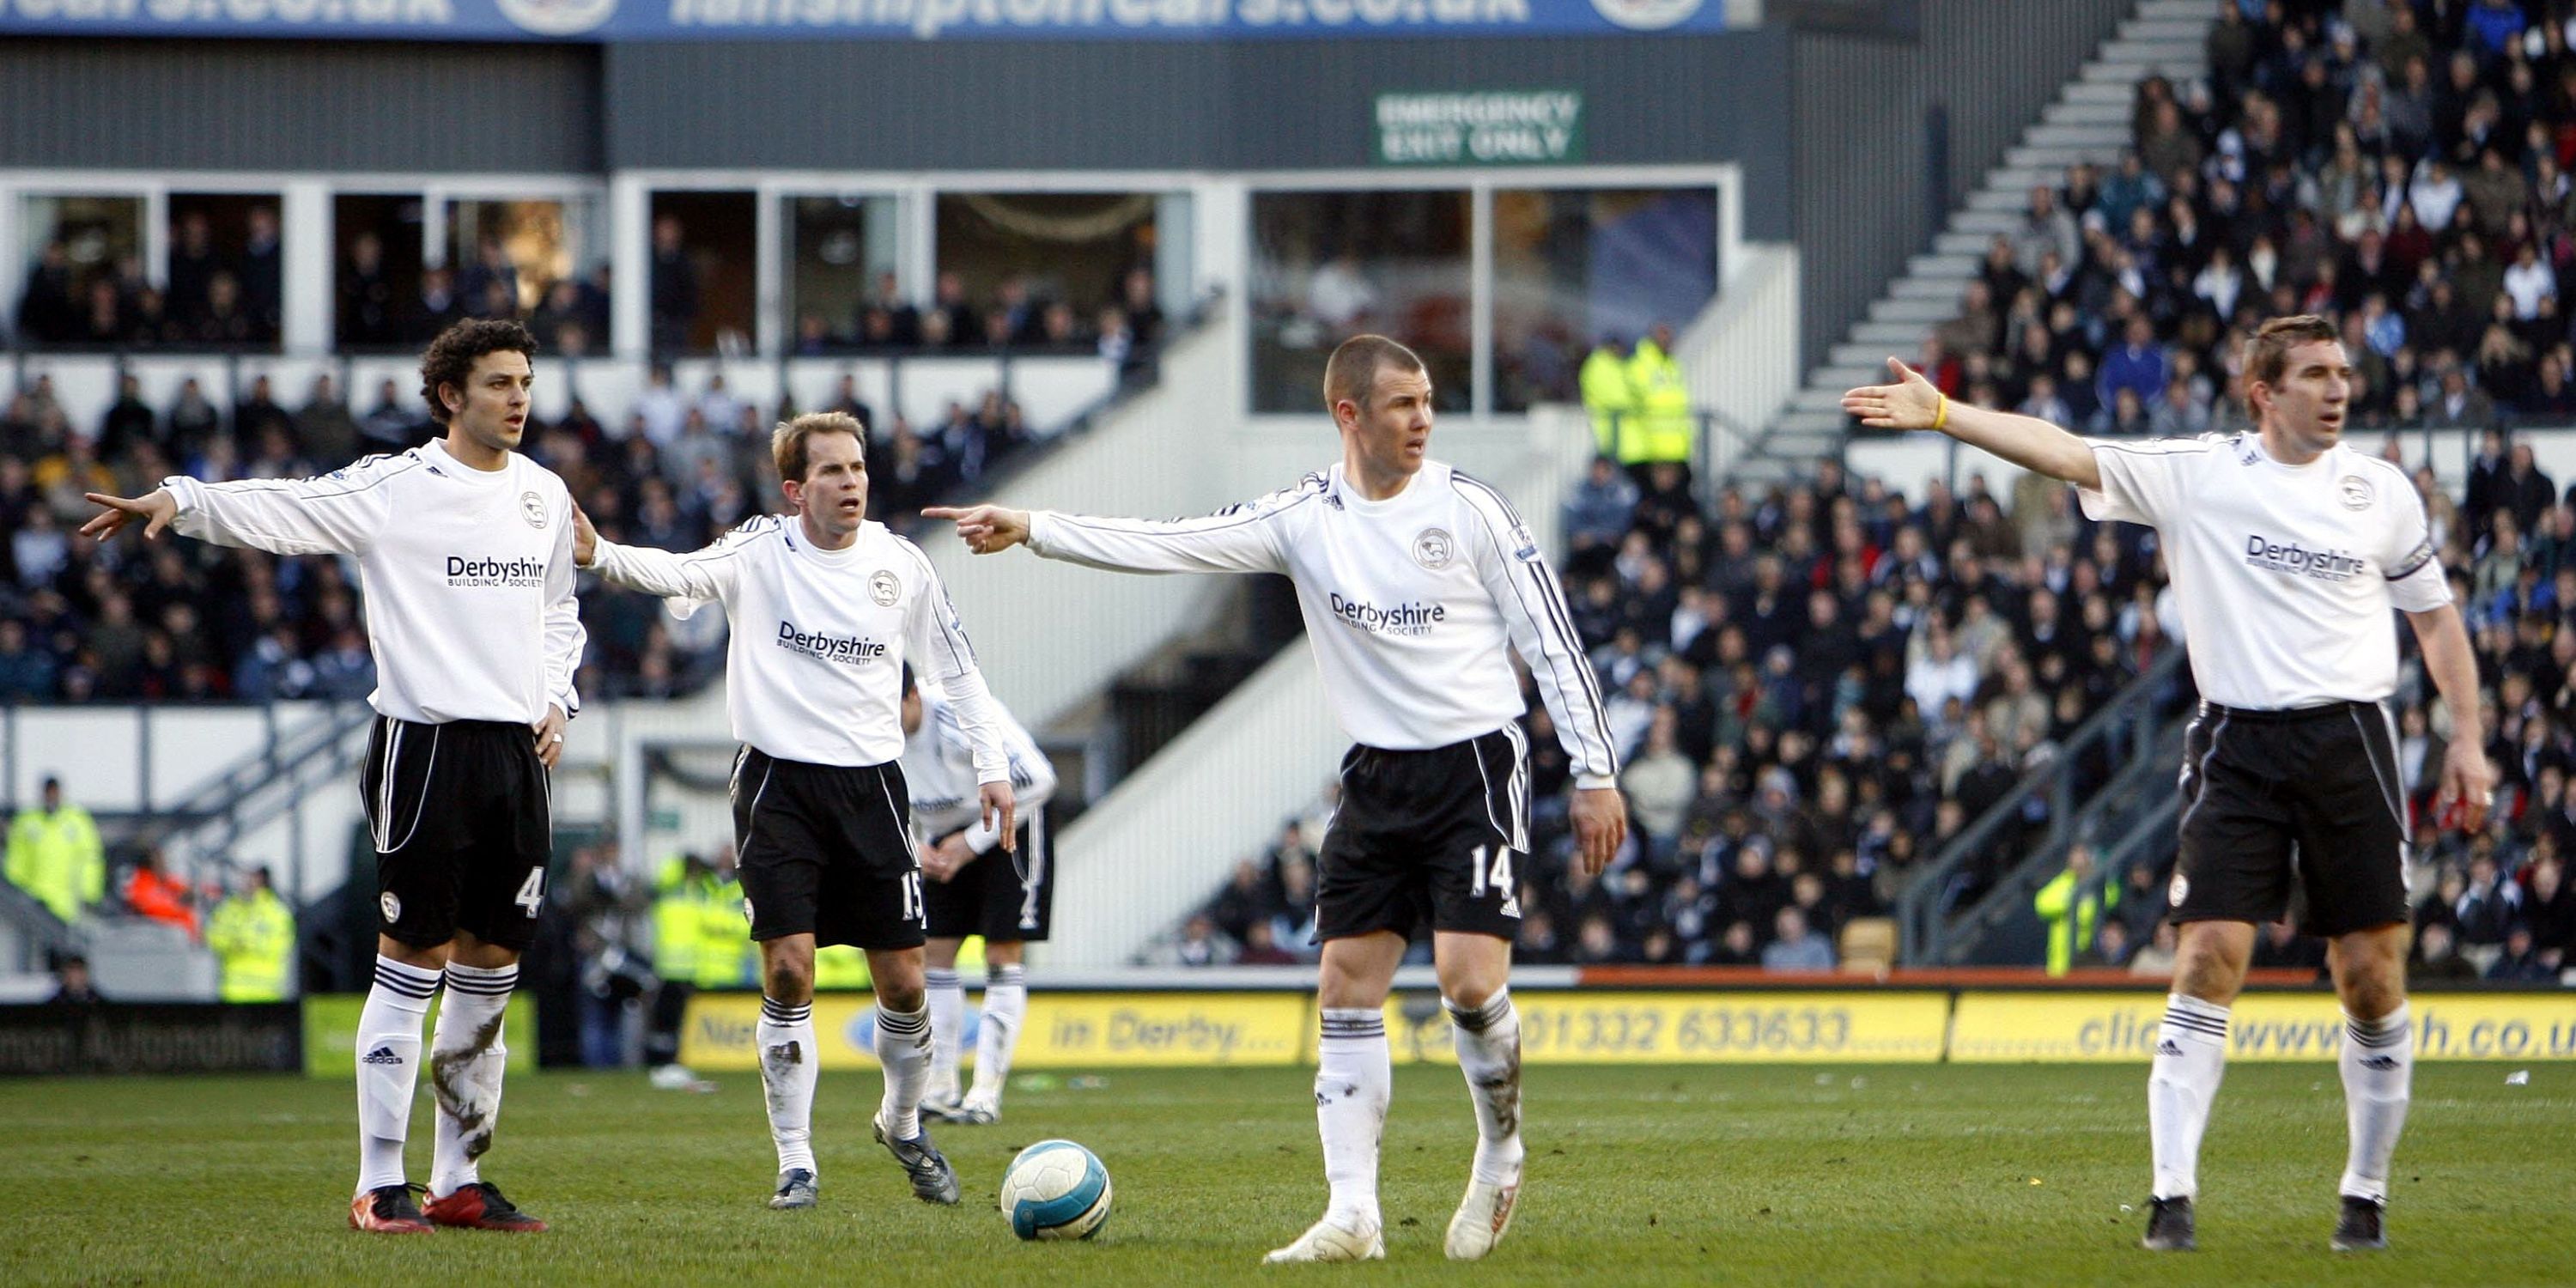 Derby-county-2007-2008